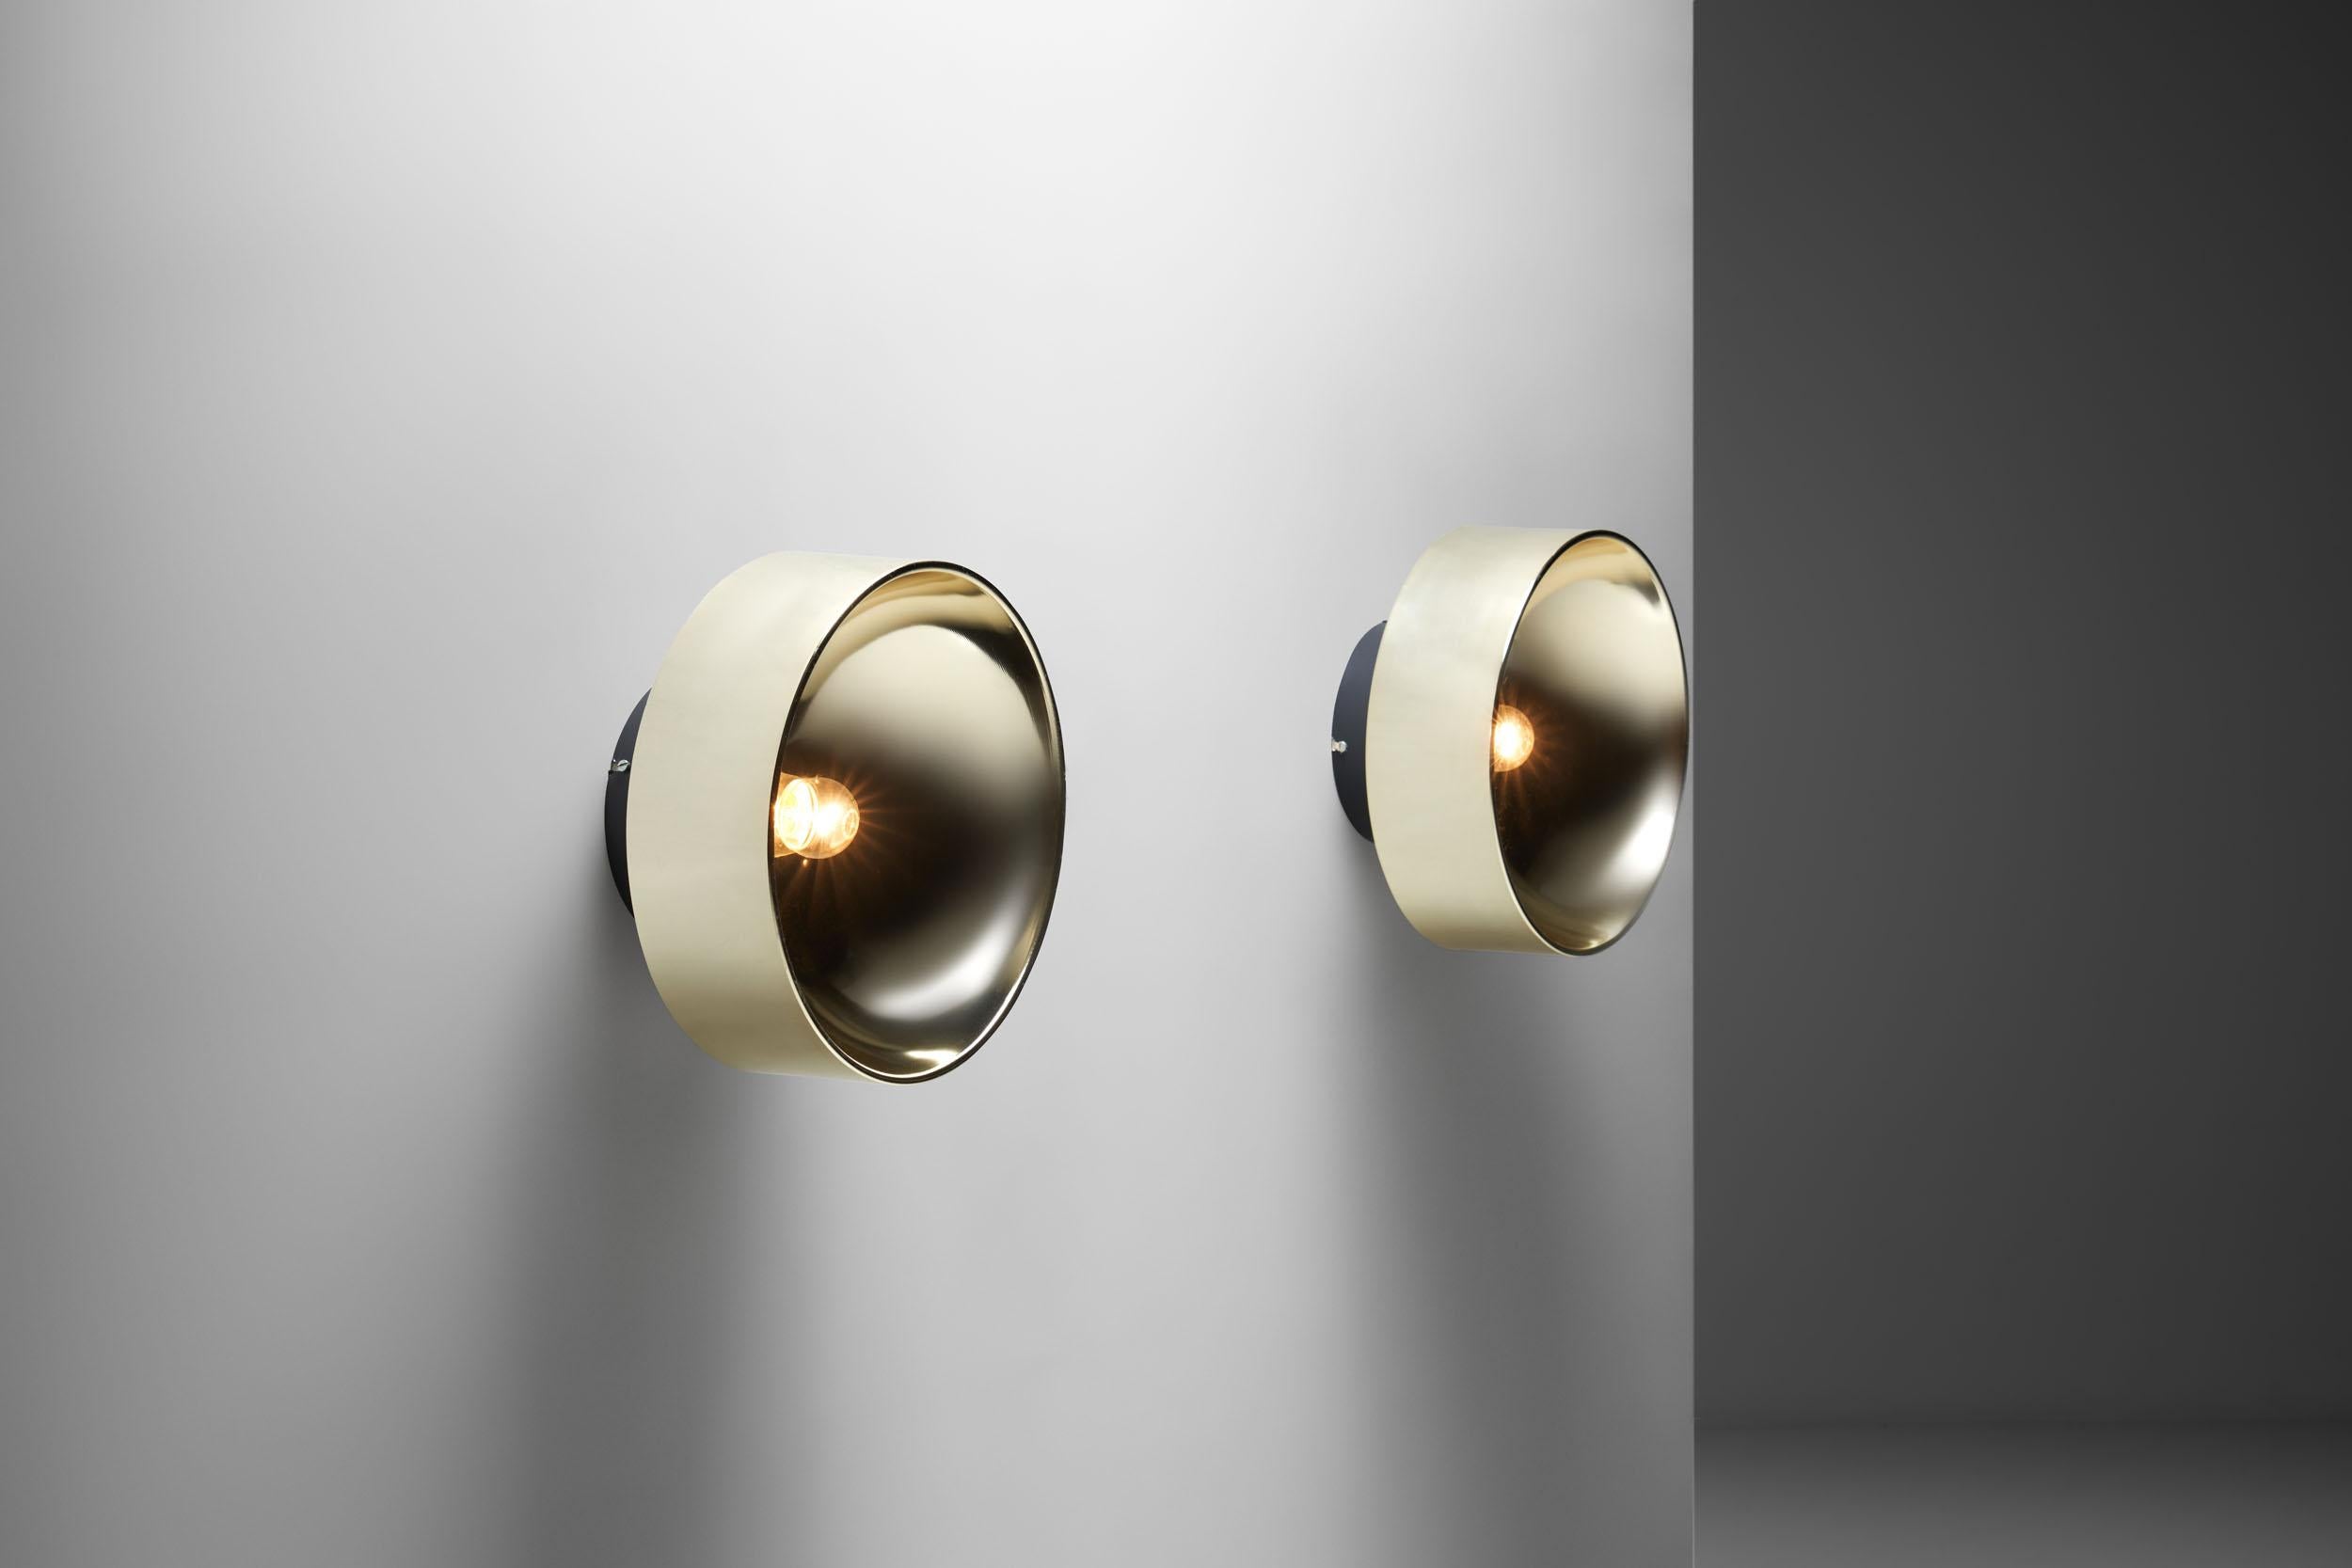 This pair of Peter Celsing wall sconces are celebrated for their iconic design, bringing modernity into any setting. Being a visual representation of “Svensk design”, this model projects a powerful, concrete rendering of a sort of essentialized